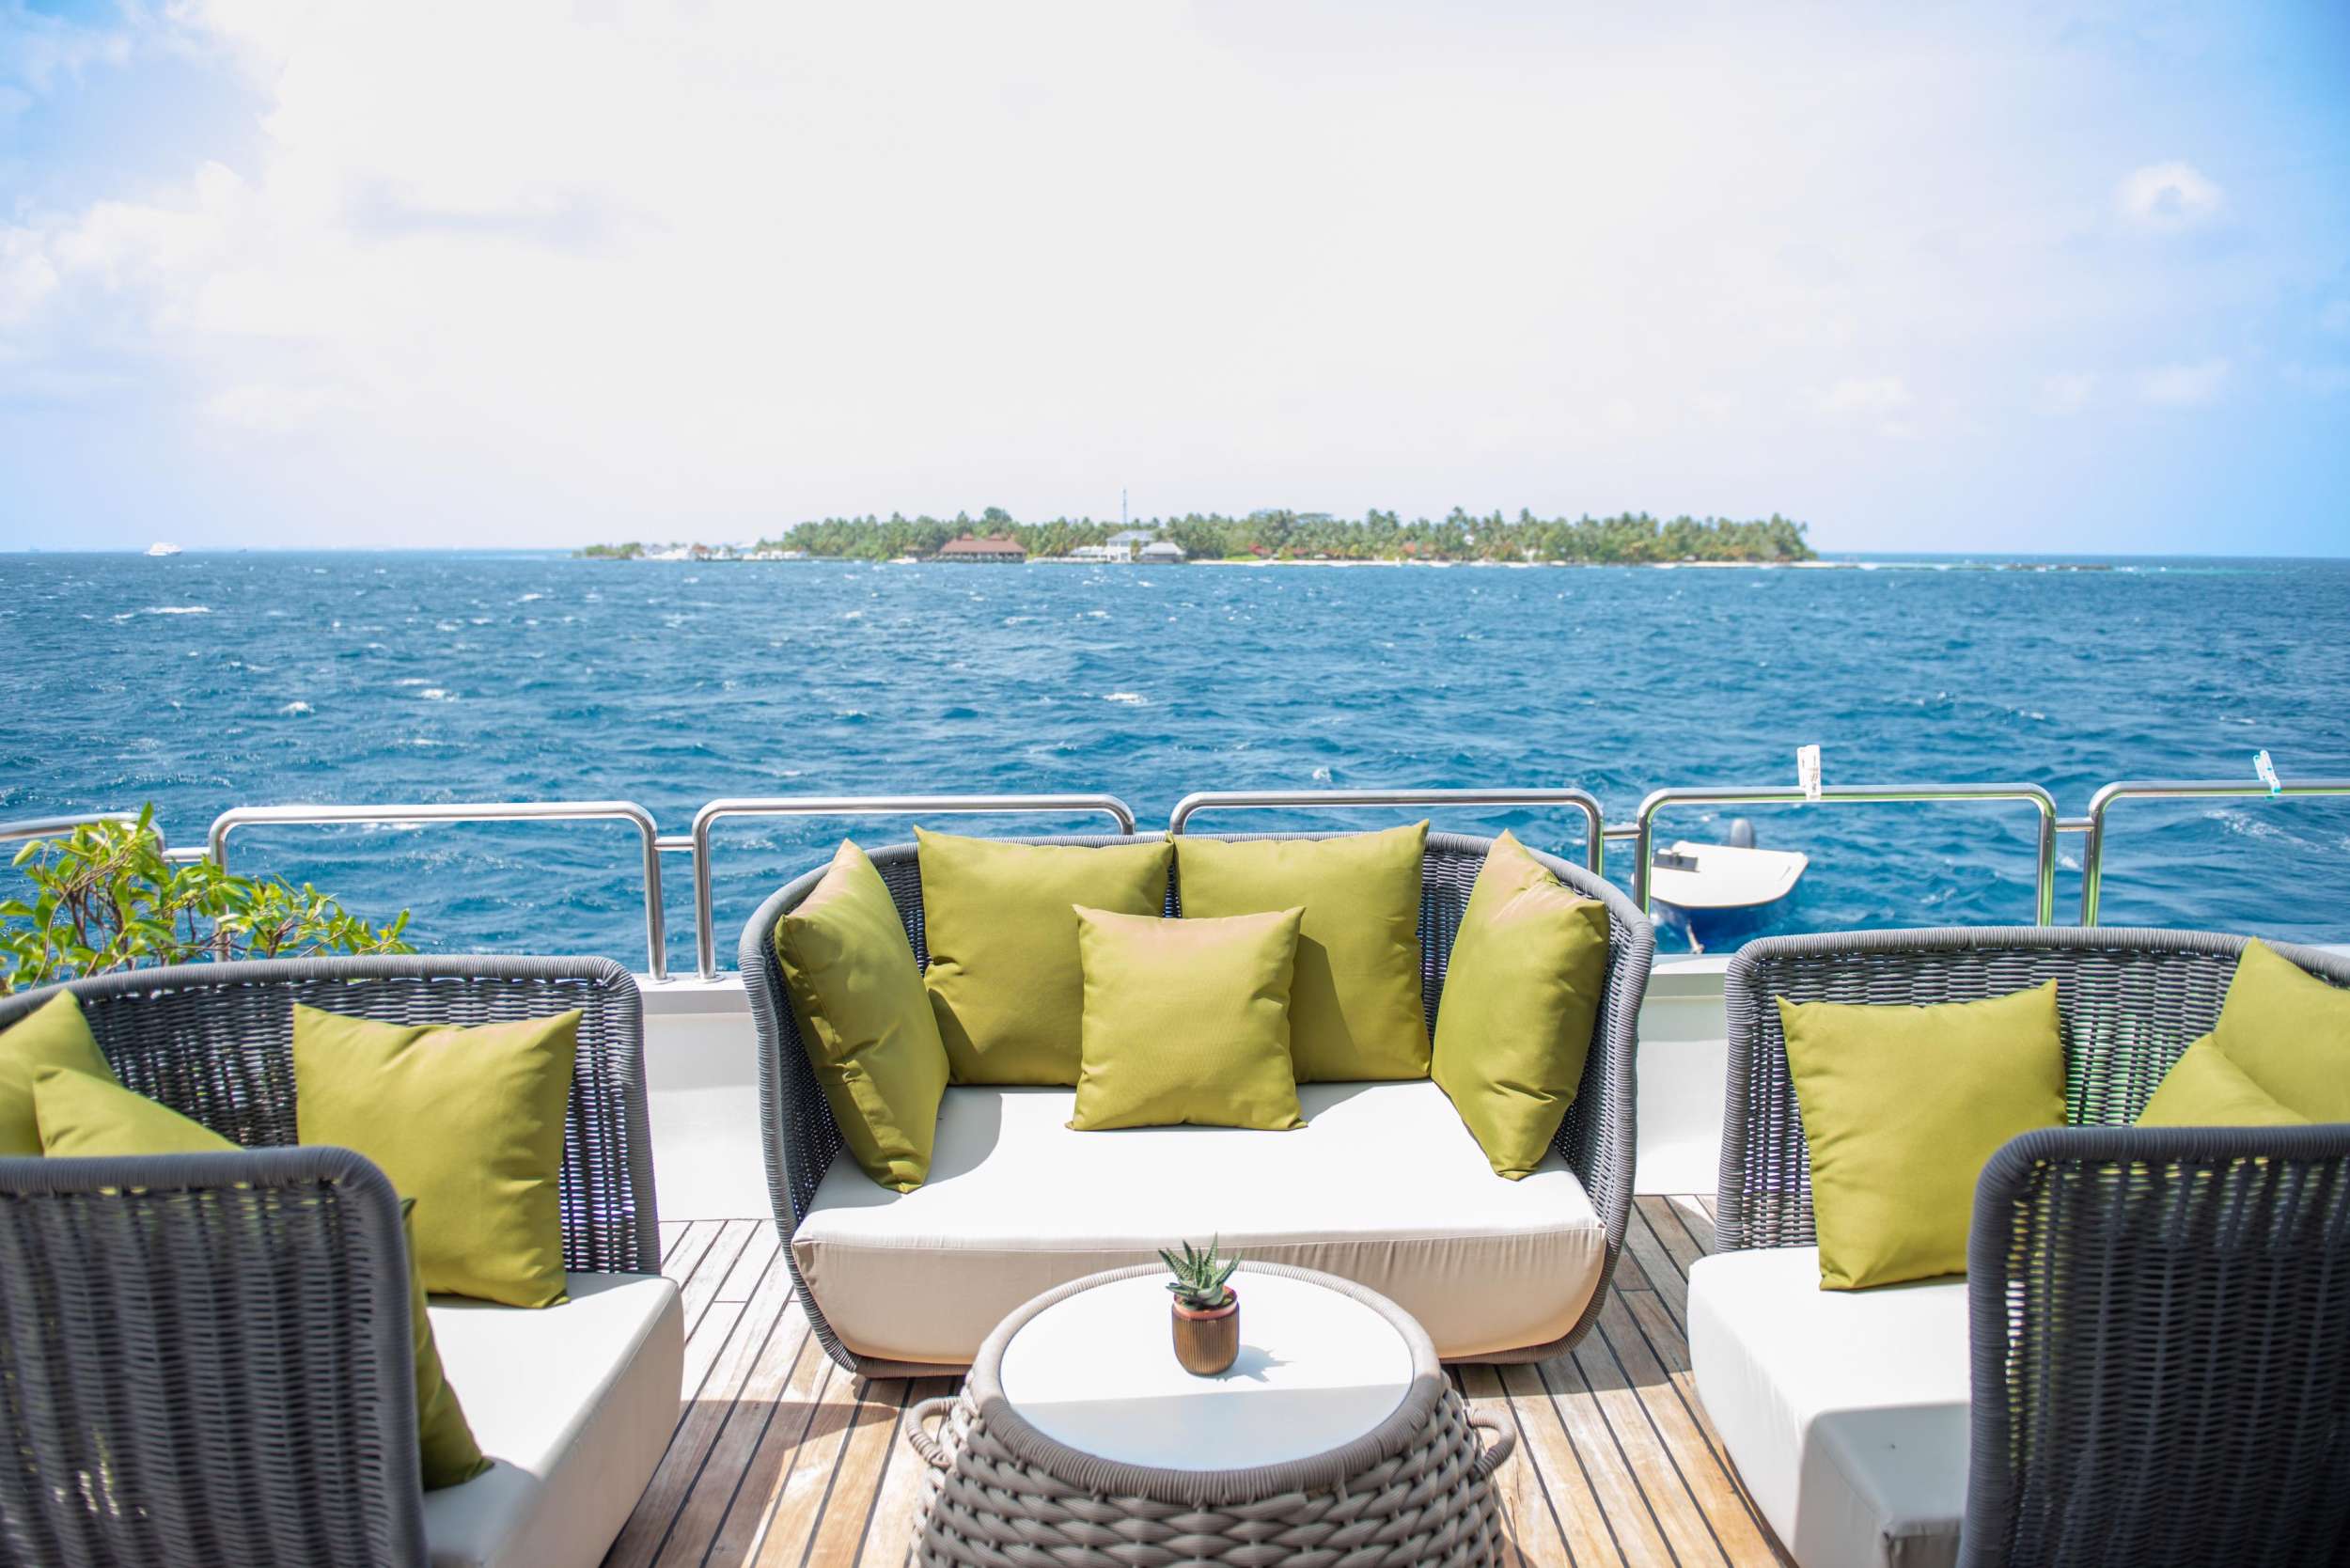 ARK NOBLE - Yacht Charter Maldives & Boat hire in Indian Ocean & SE Asia 6